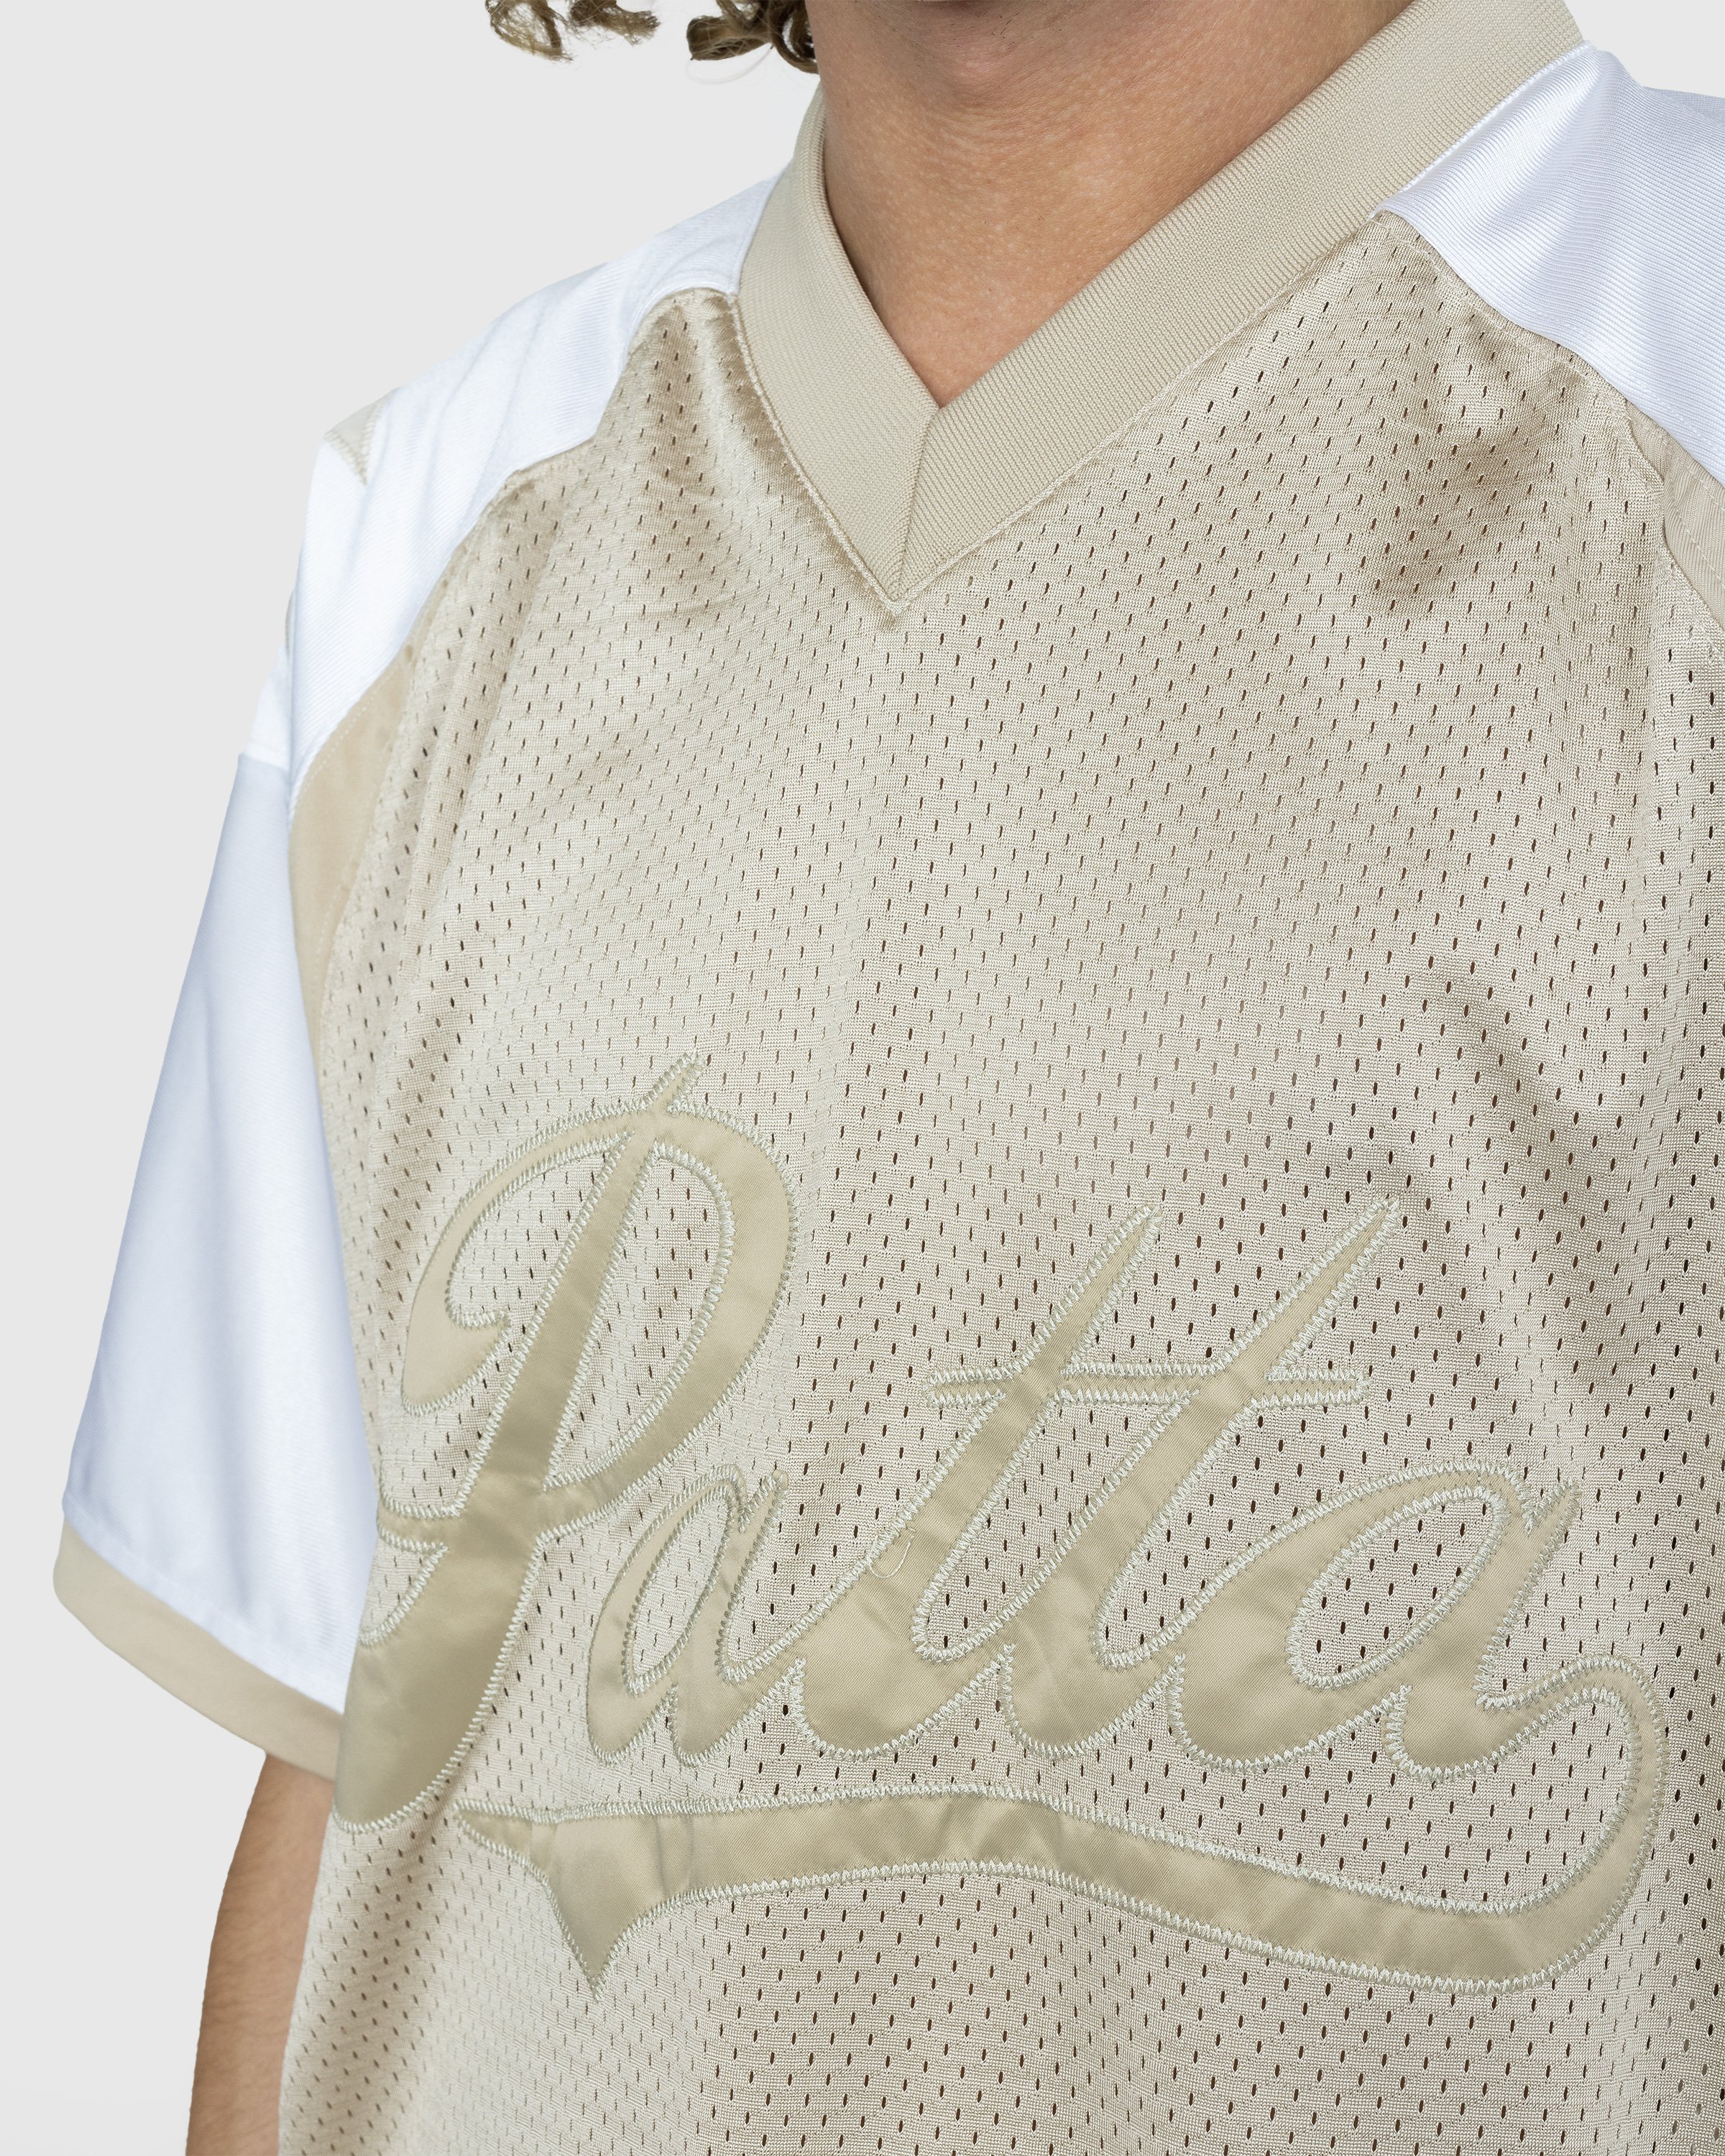 Patta - Respect Football Jersey Cement/White - Clothing - White - Image 4